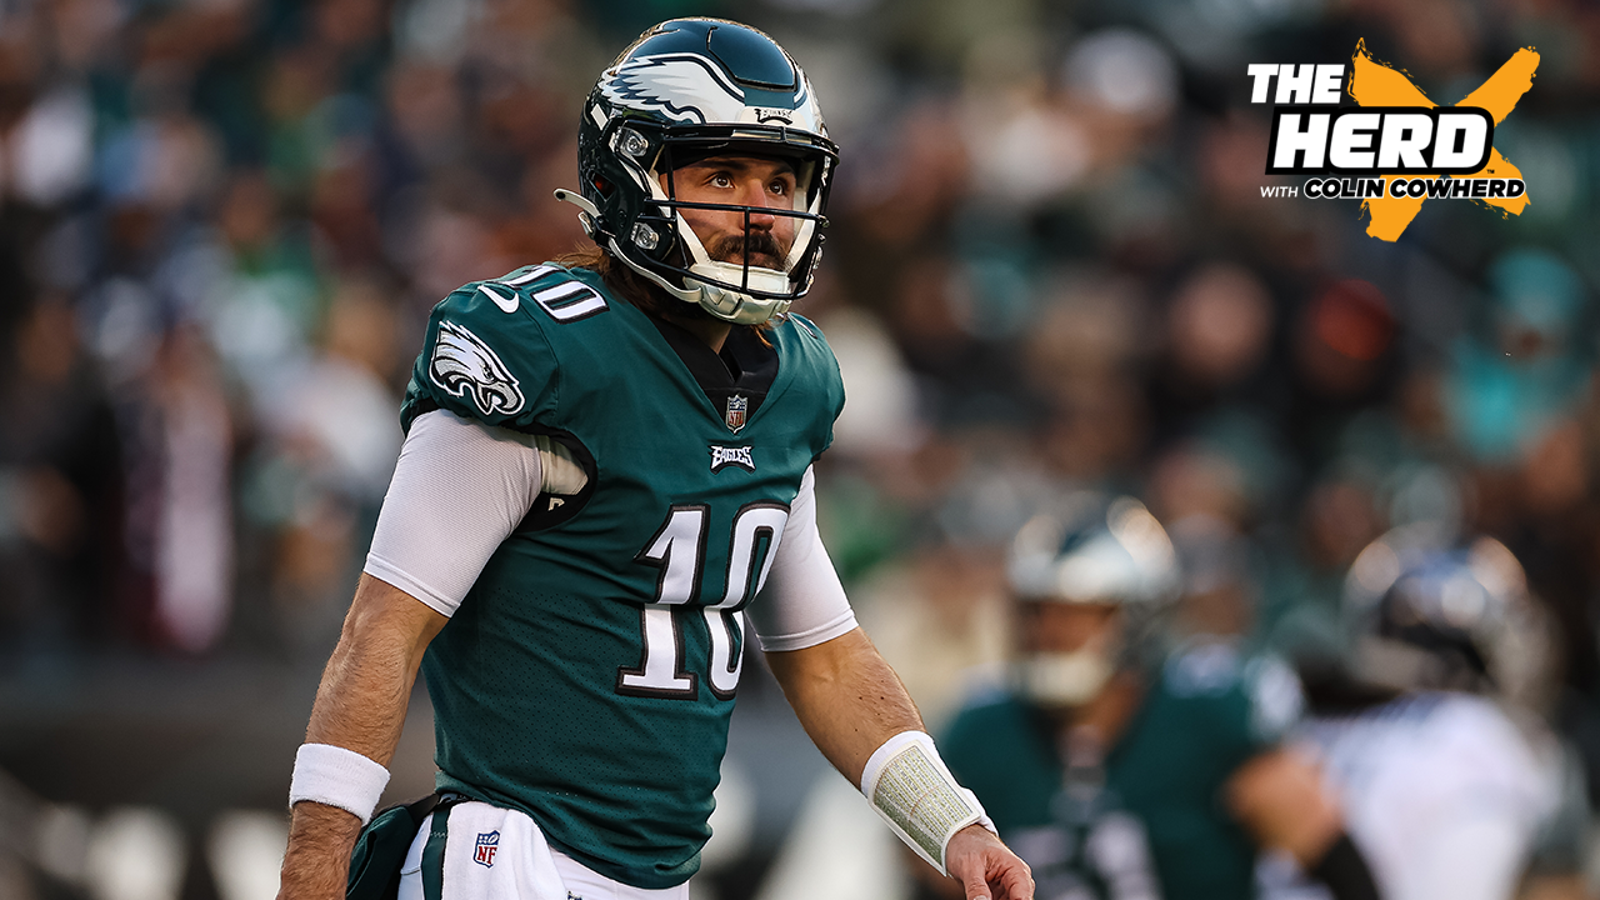 If Gardner Minshew starts against Cowboys, can Eagles come away with a win?